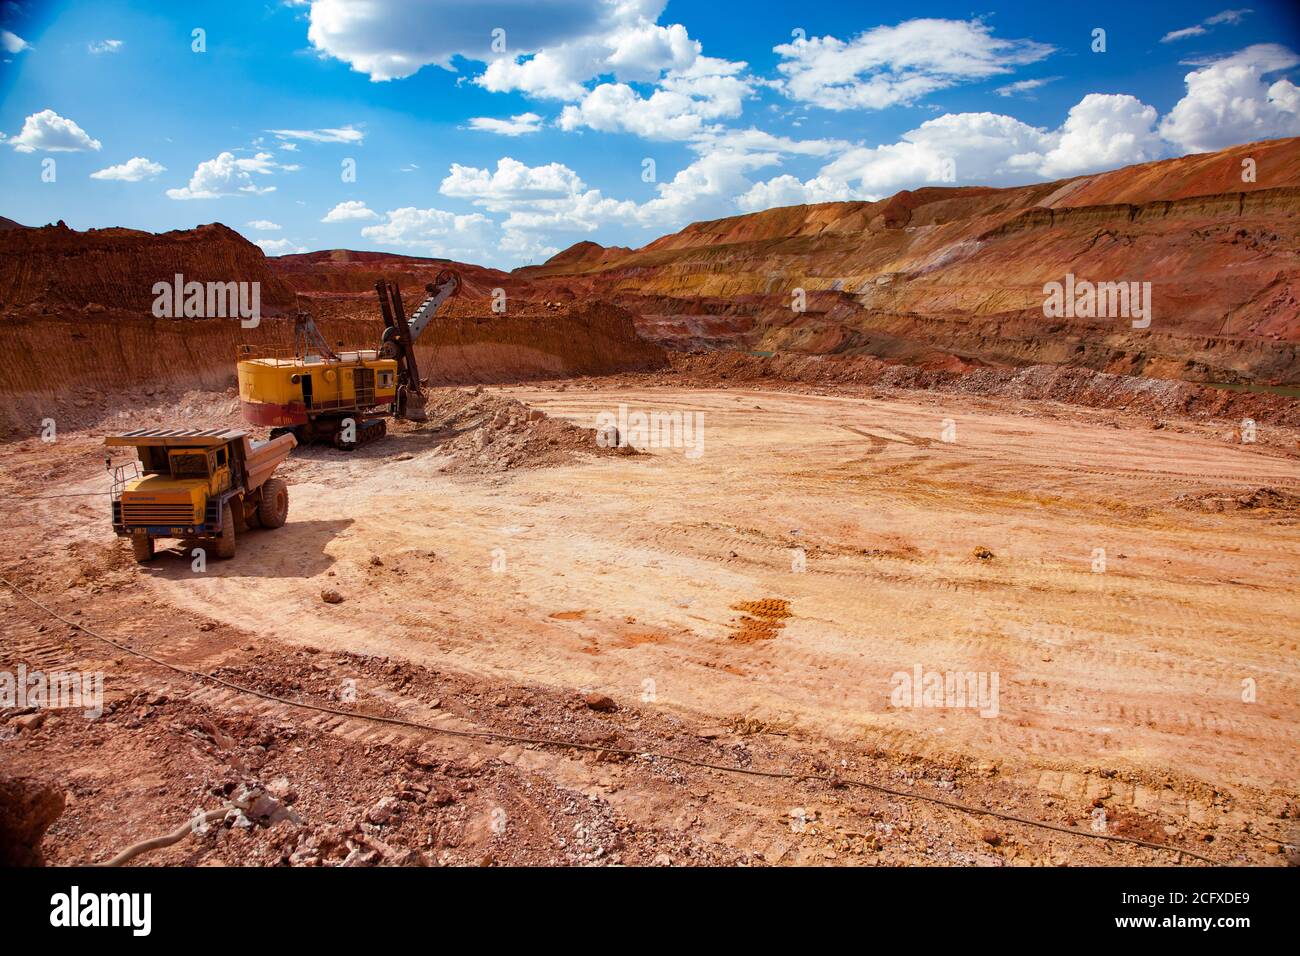 Aluminium ore mining and transporting. Bauxite clay quarry (mine). Excavator loading ore to Belaz dump truck. Blue sky with light clouds. Stock Photo